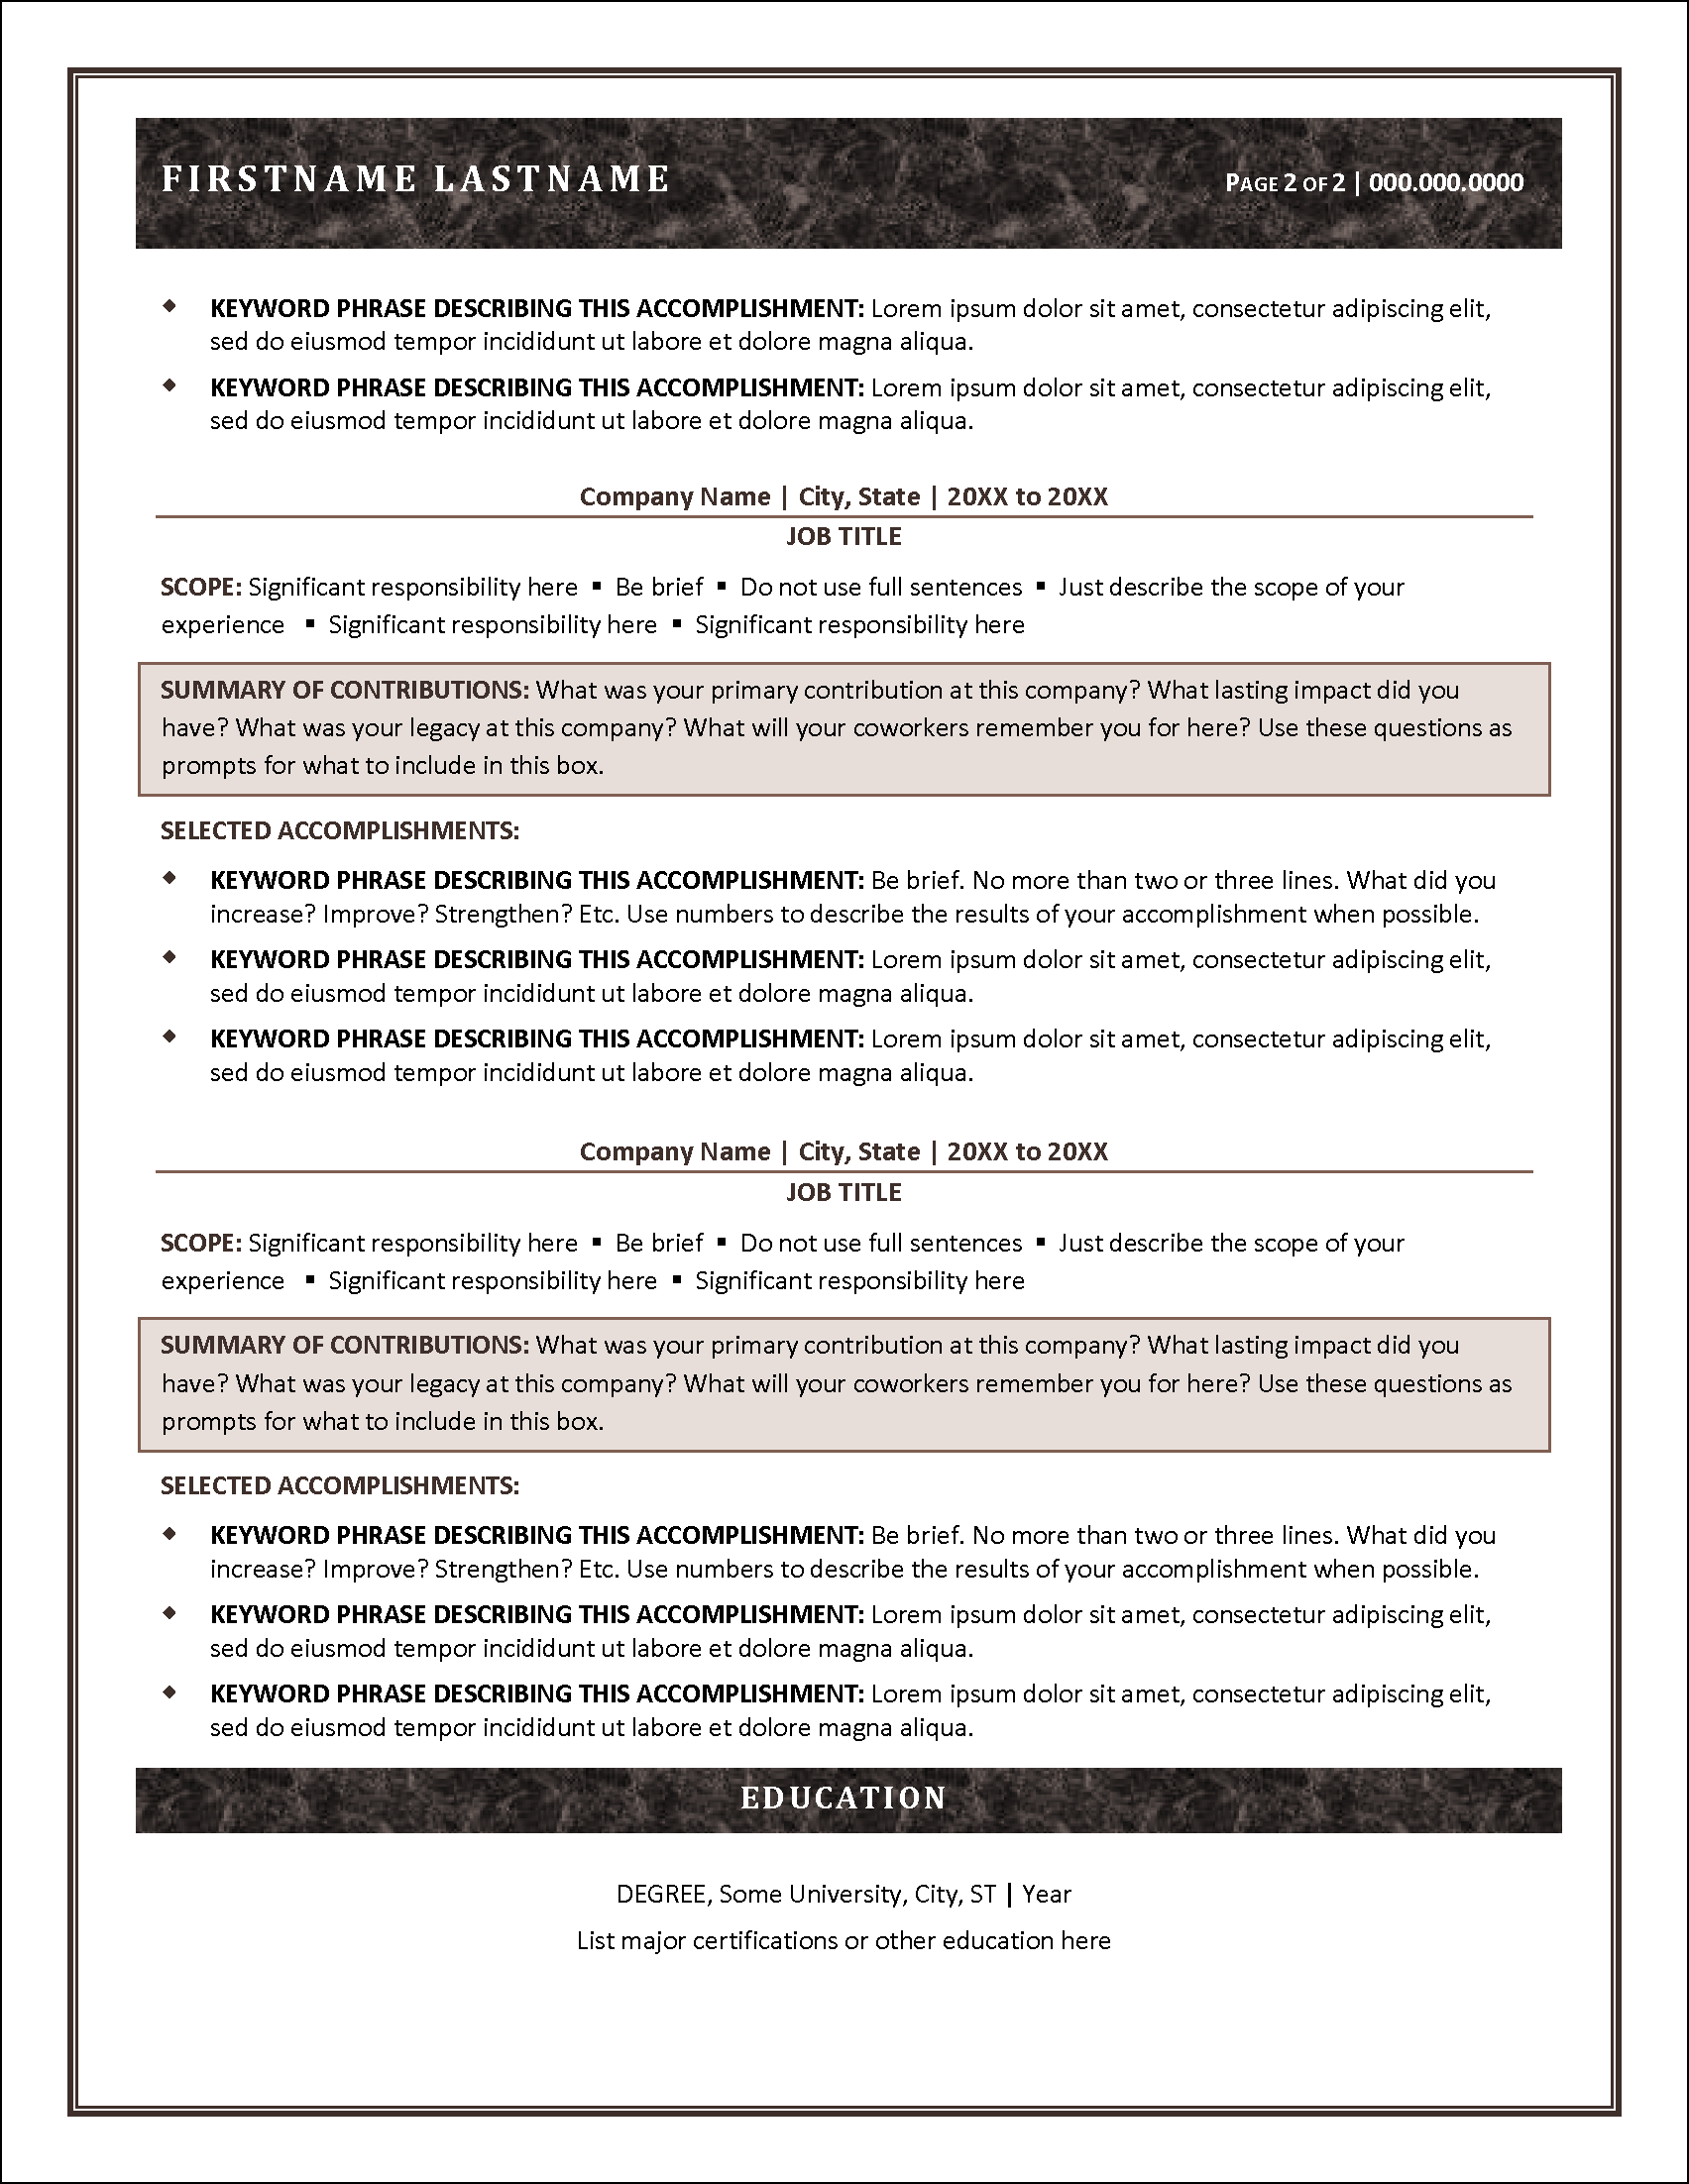 Modern Classic Resume Page 2